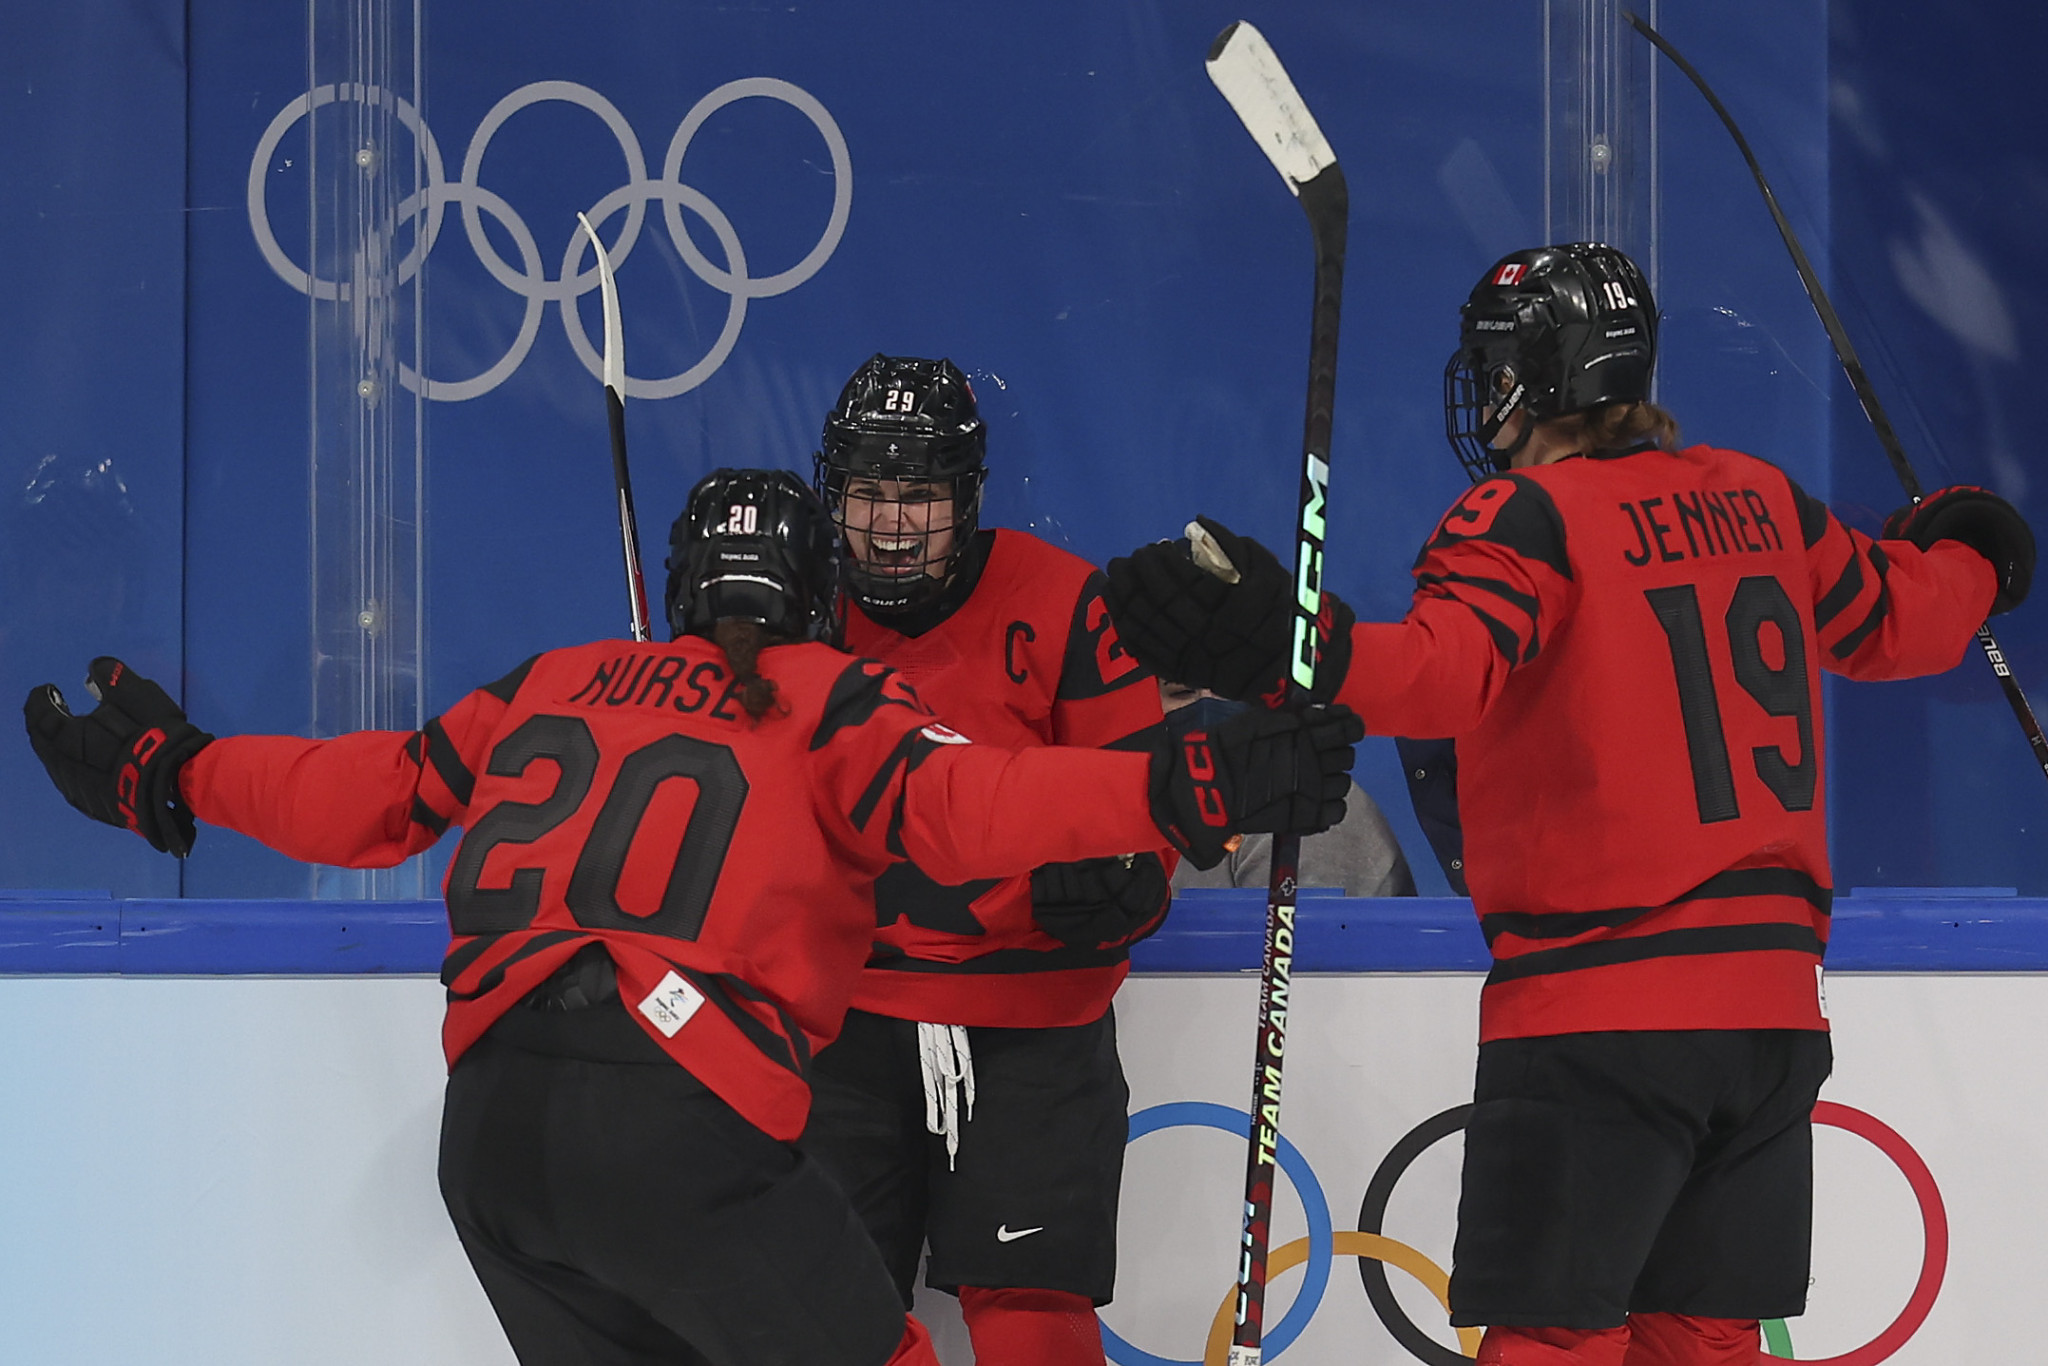 Canada to bid for third straight title at IIHF Women's World Championship on home ice